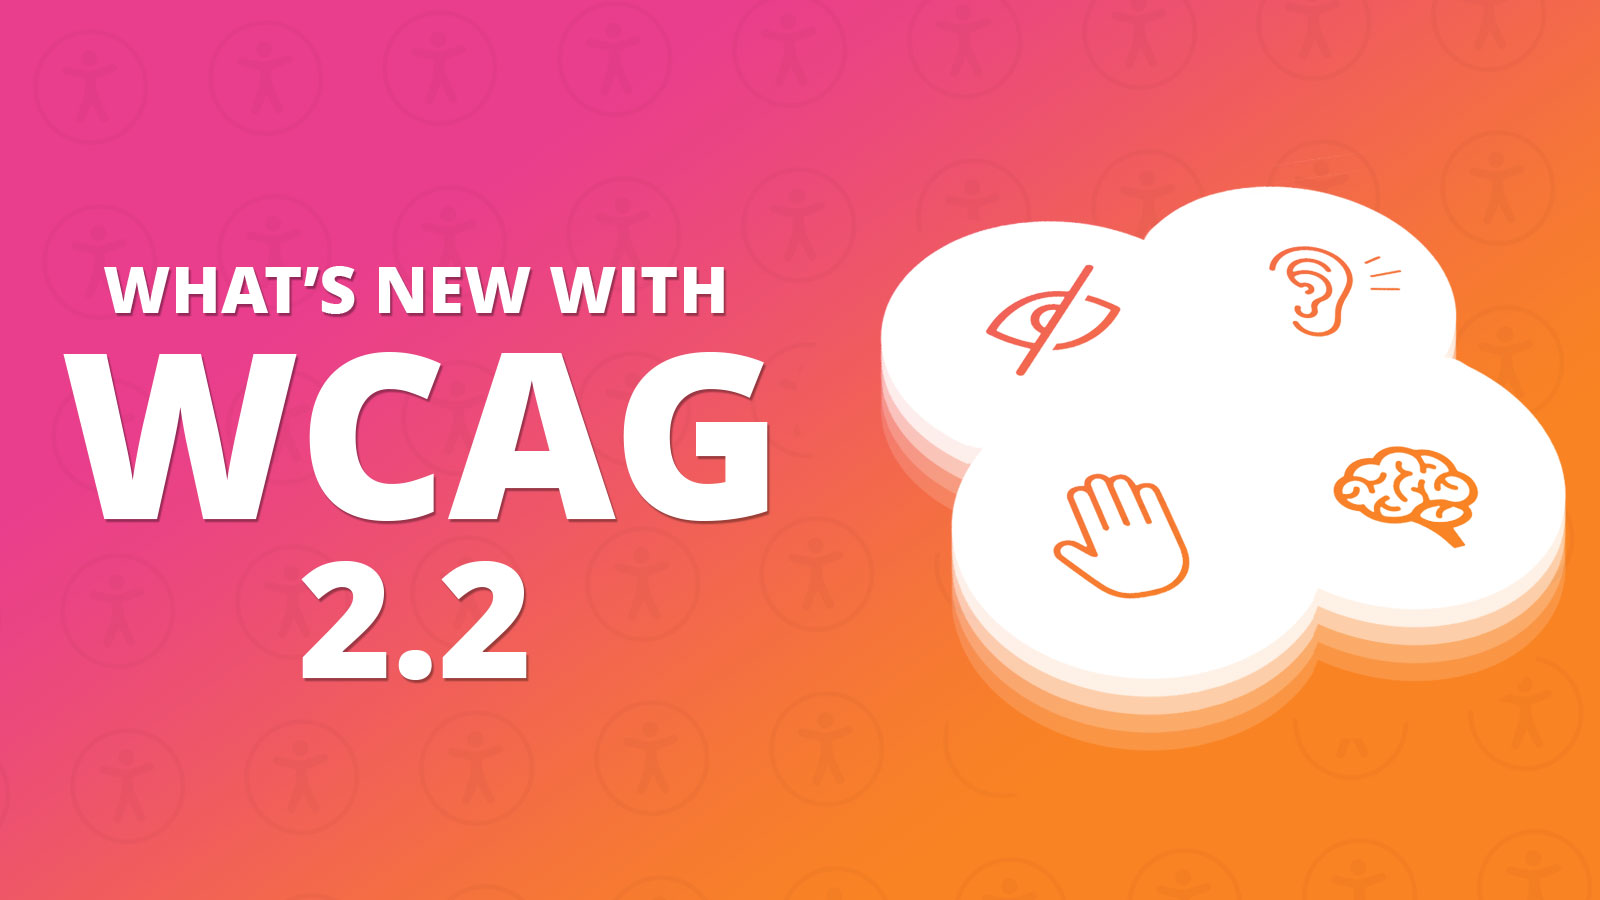 What's new with WCAG 2.2